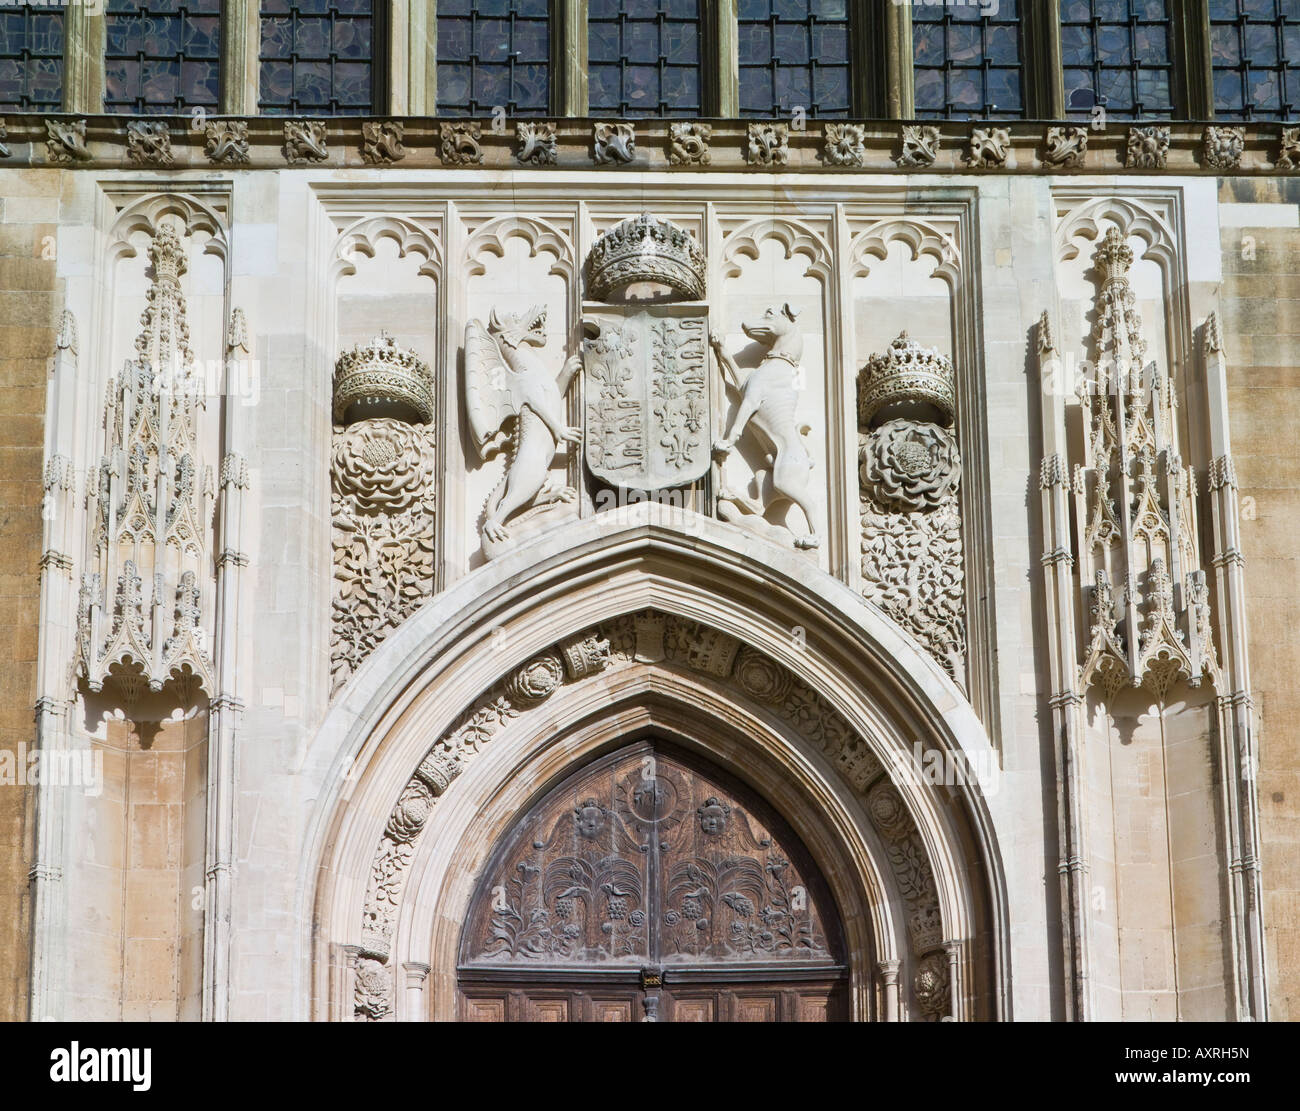 detail of west facade, King's College Cambridge chapel Stock Photo